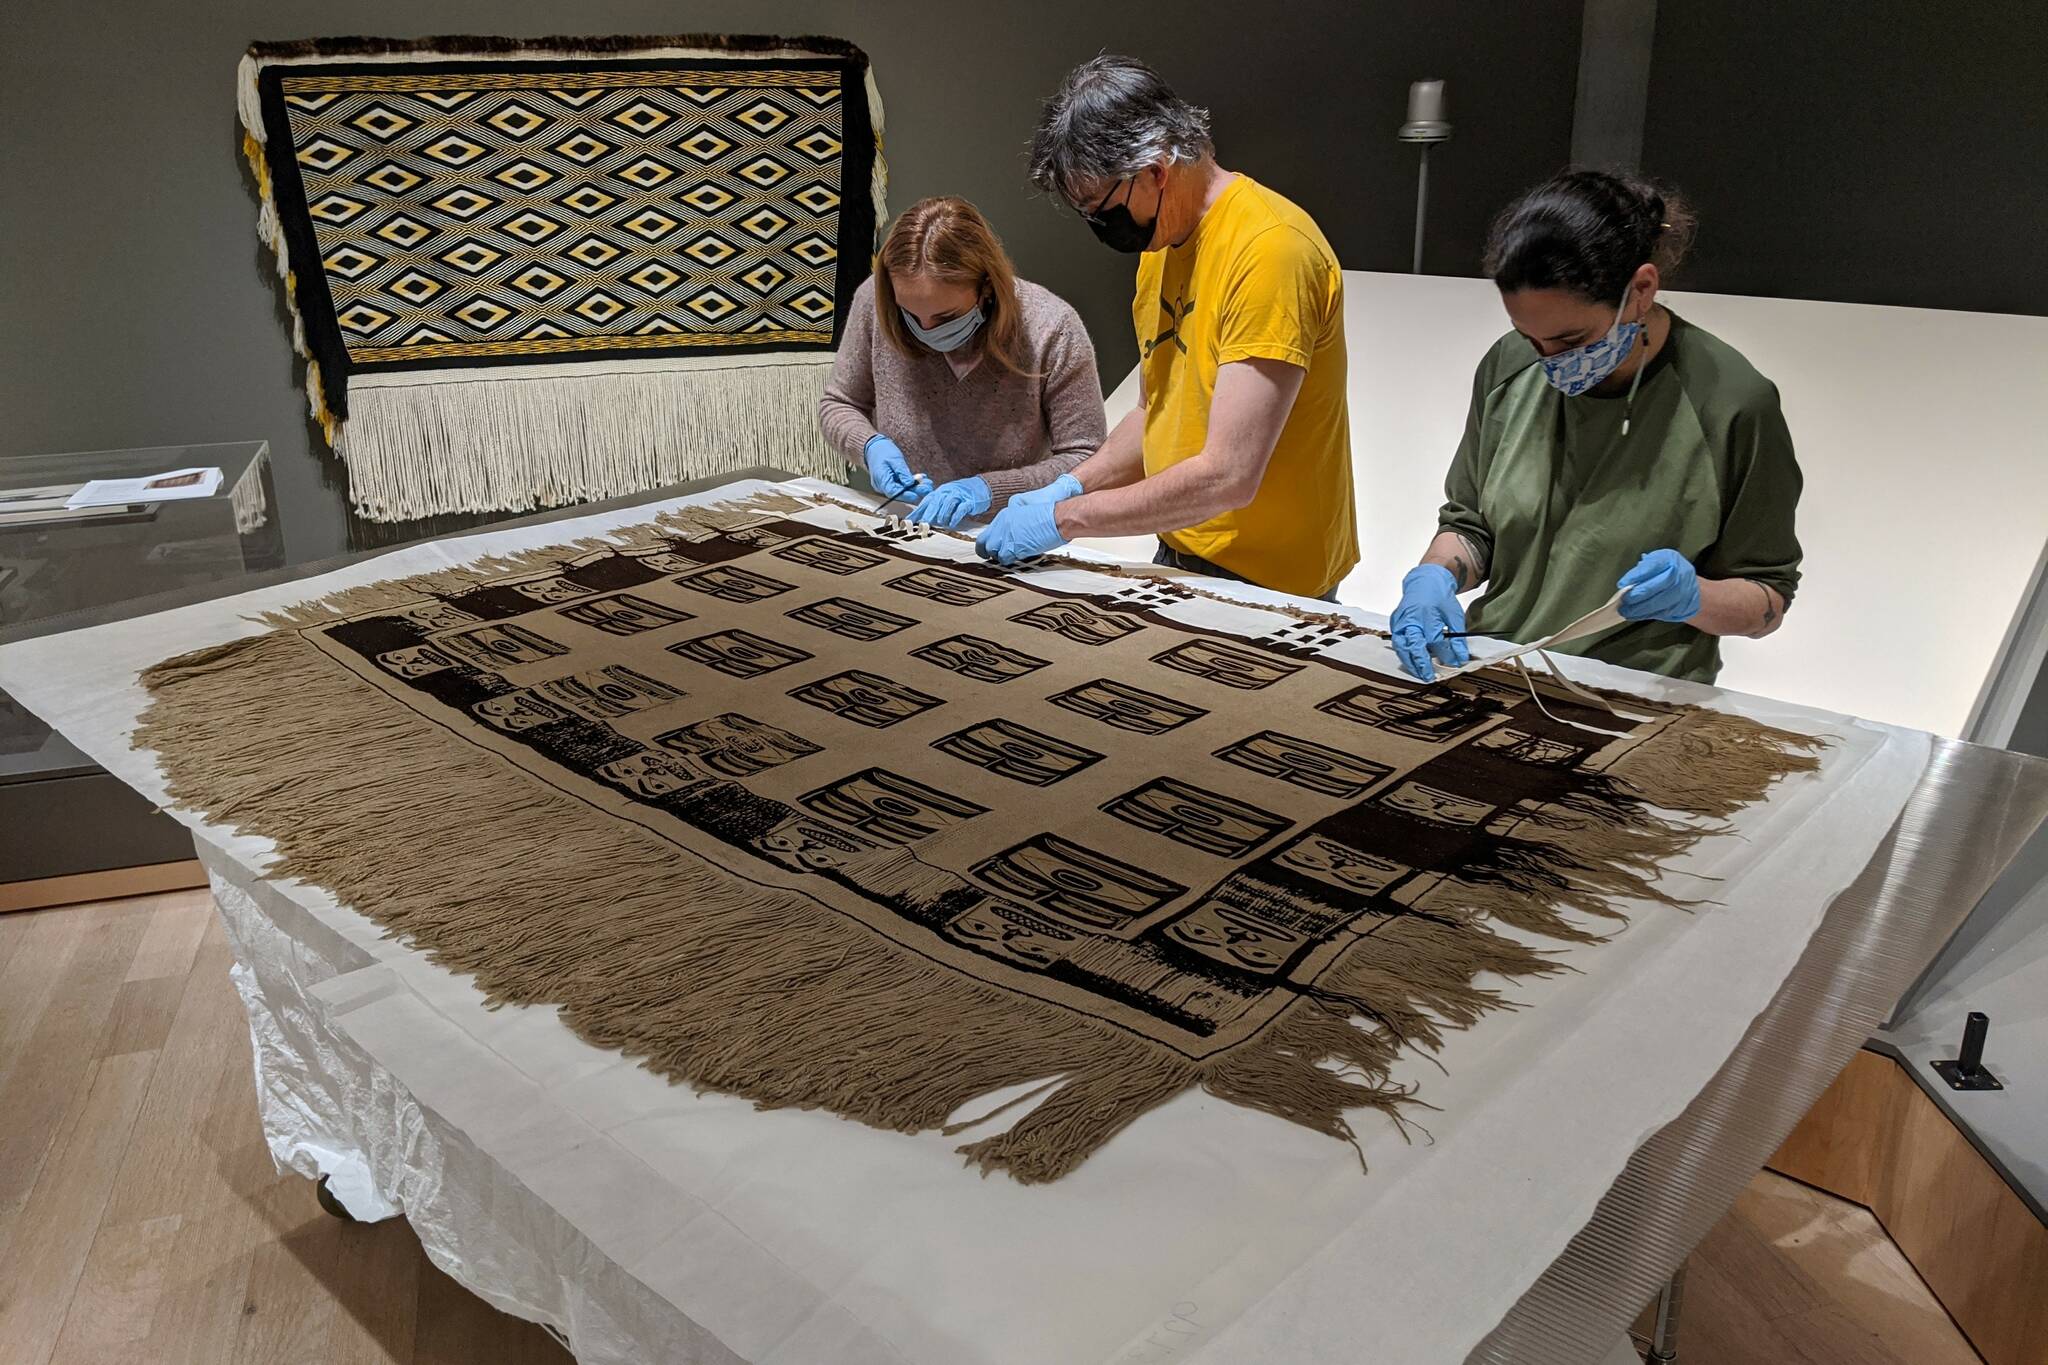 Courtesy Photo / Chelsea Kilgore, Alaska State Library Archives and Museum 
From left to right: Jackie Manning, curator of exhibits for the Alaska State Library, Archives and Museum; Aaron Elmore, exhibit designer, and Ellen Carrlee, conservator for the museum unpack an ancient raven’s tail robe on loan from the Royal Ontario Museum in Canada. This robe is one of only about a dozen older robes in existence, according to SLAM collections curator Steven Kenrikson, and will only be on display at SLAM until next month.